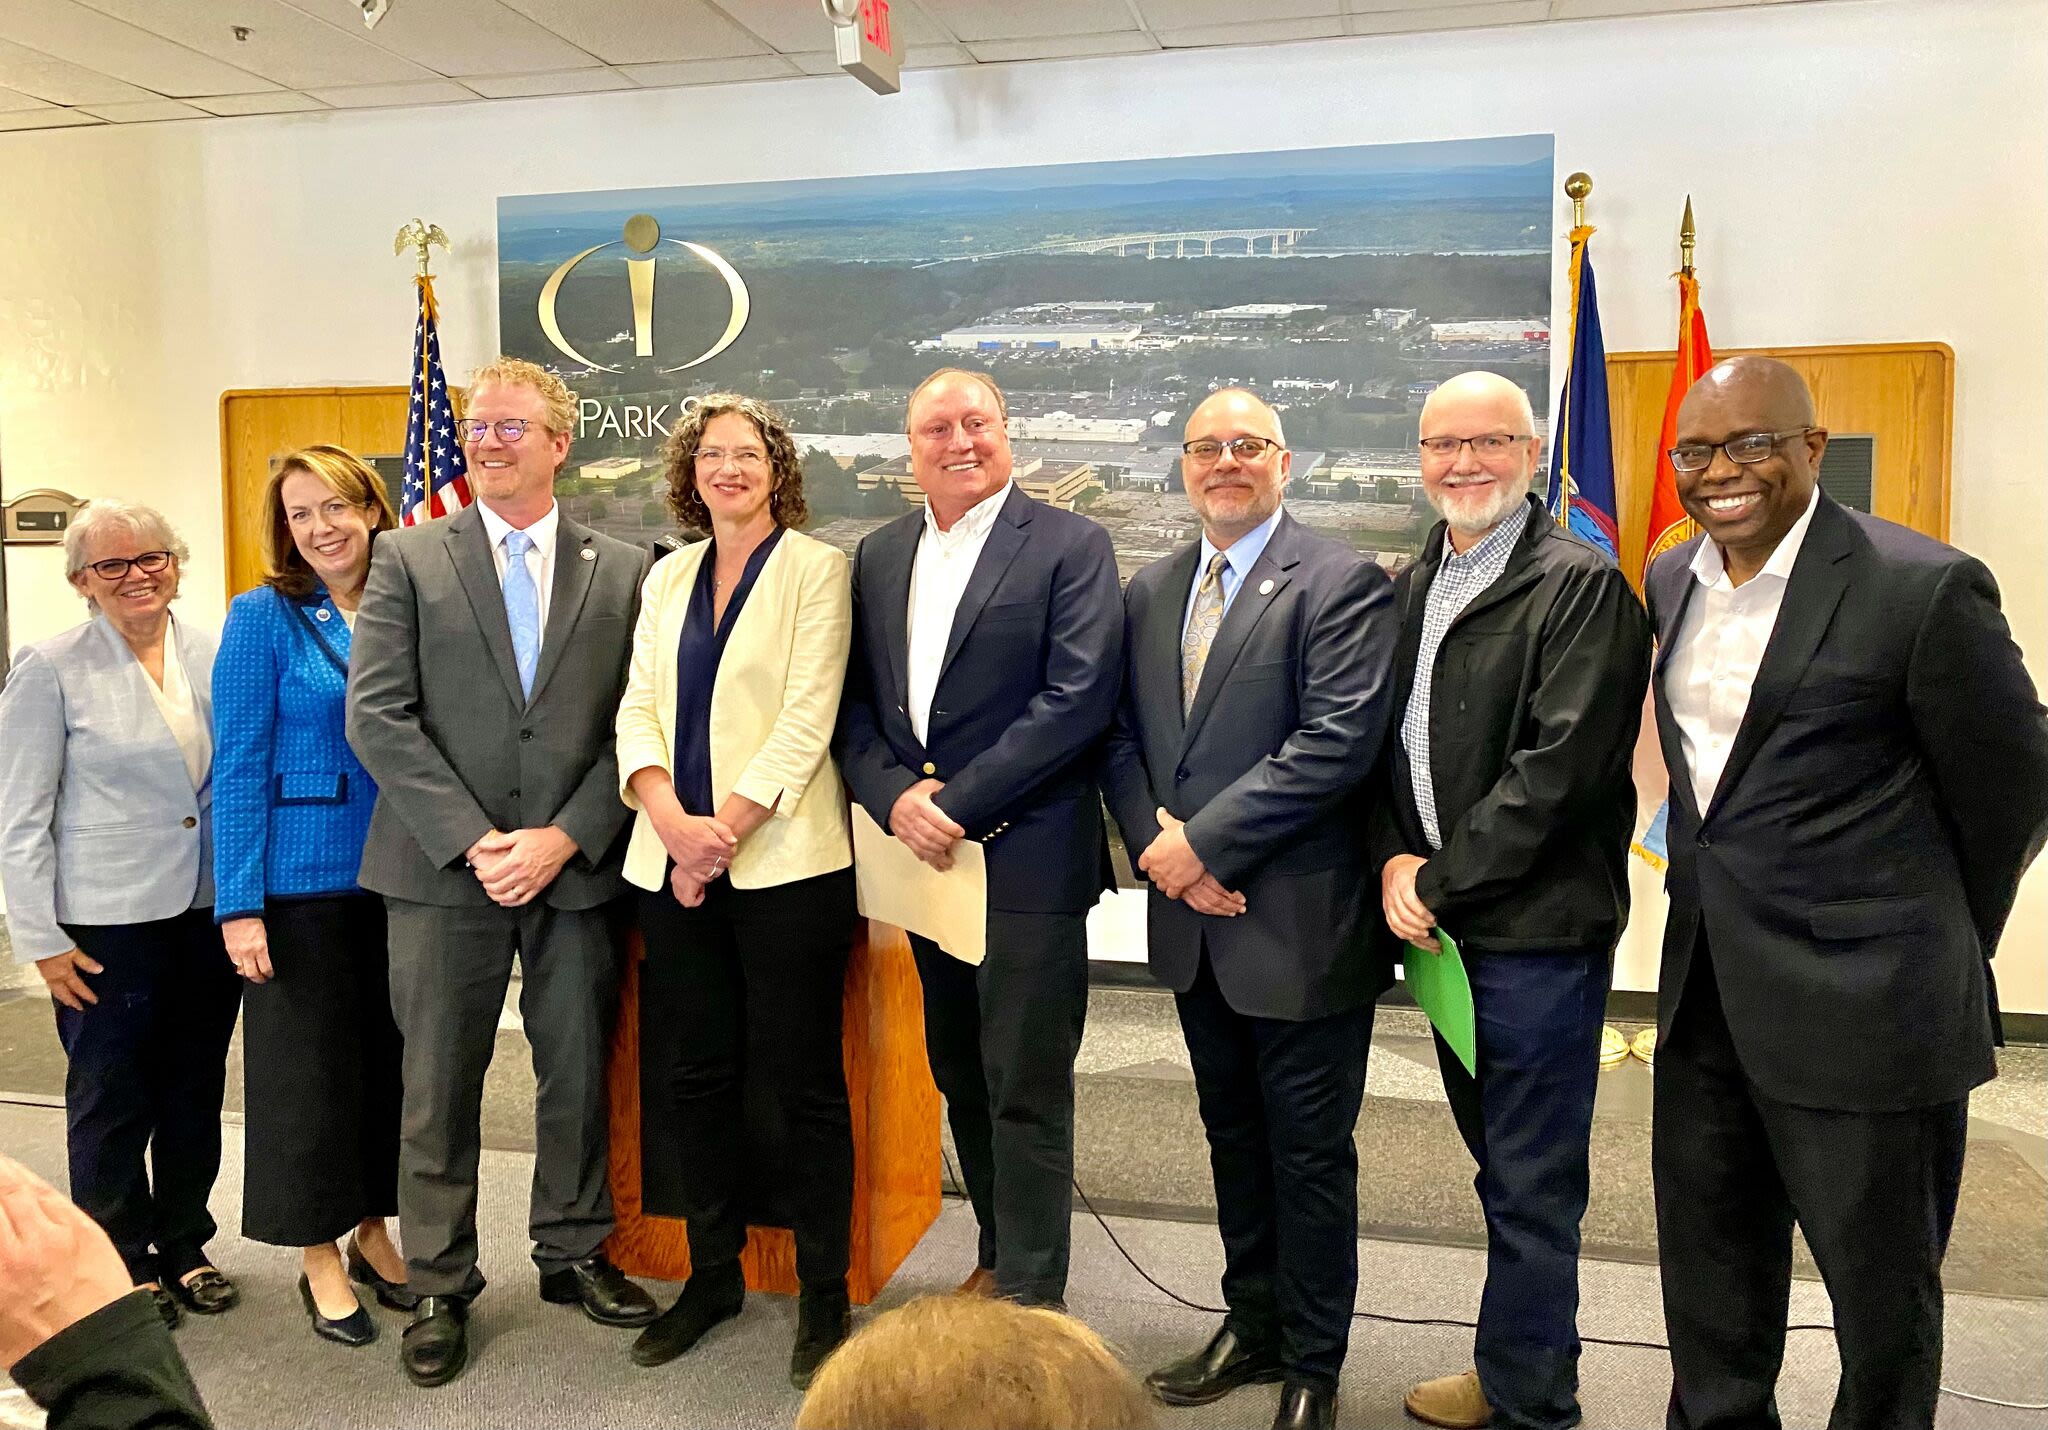 Ulster County announces workforce innovation center at iPark 87